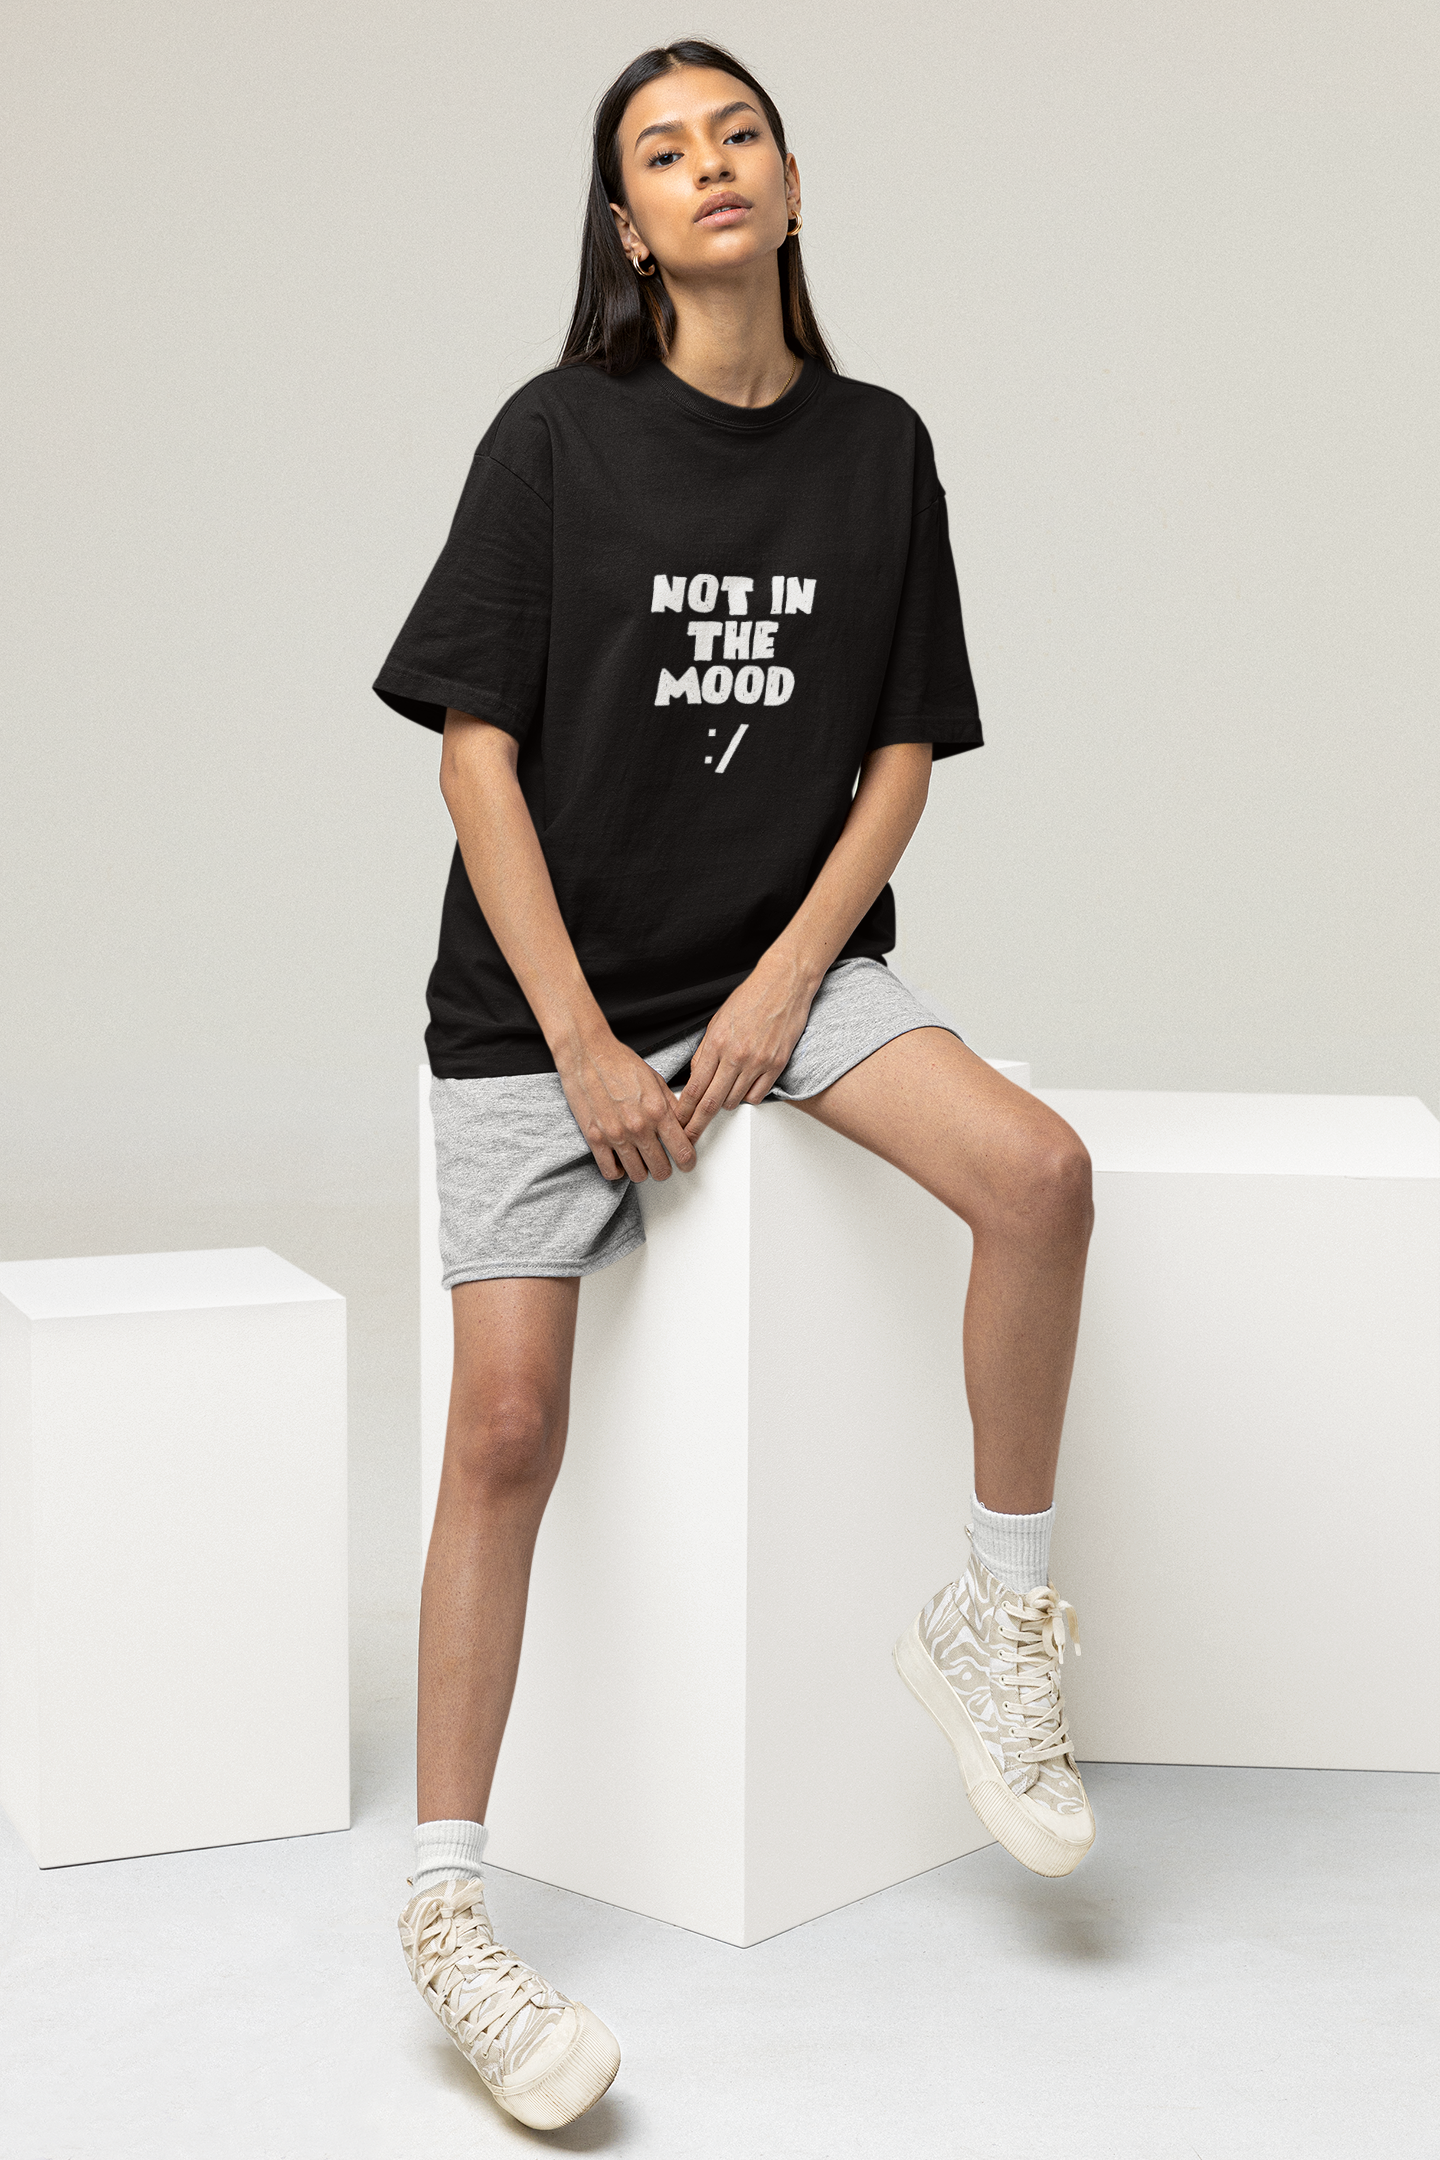 OVERSIZED TSHIRTS BLACK: NOT IN MOOD